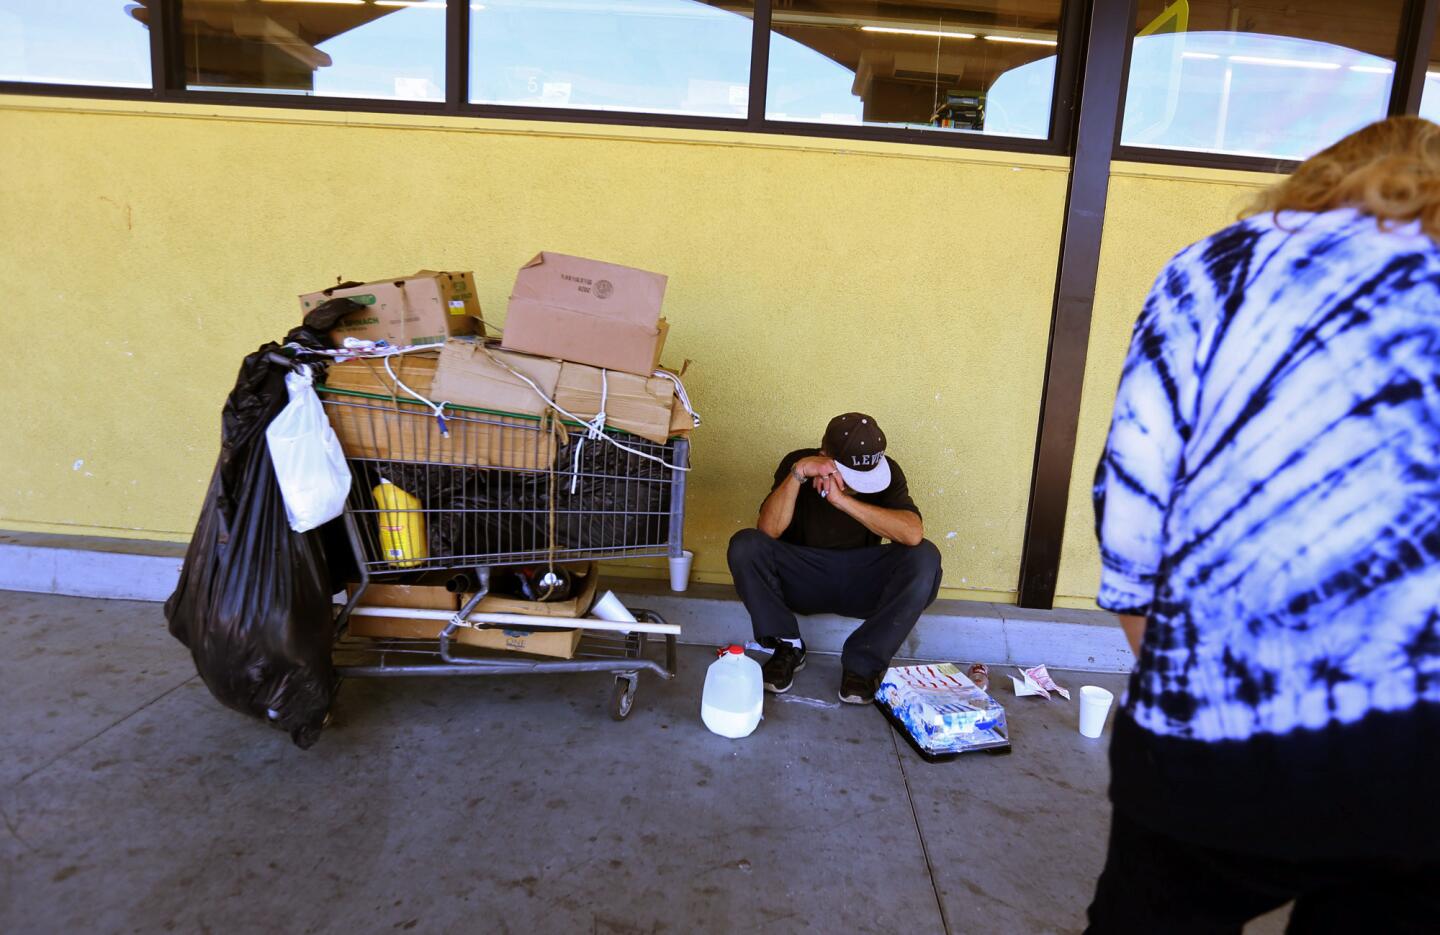 The homeless and retail community in Sylmar